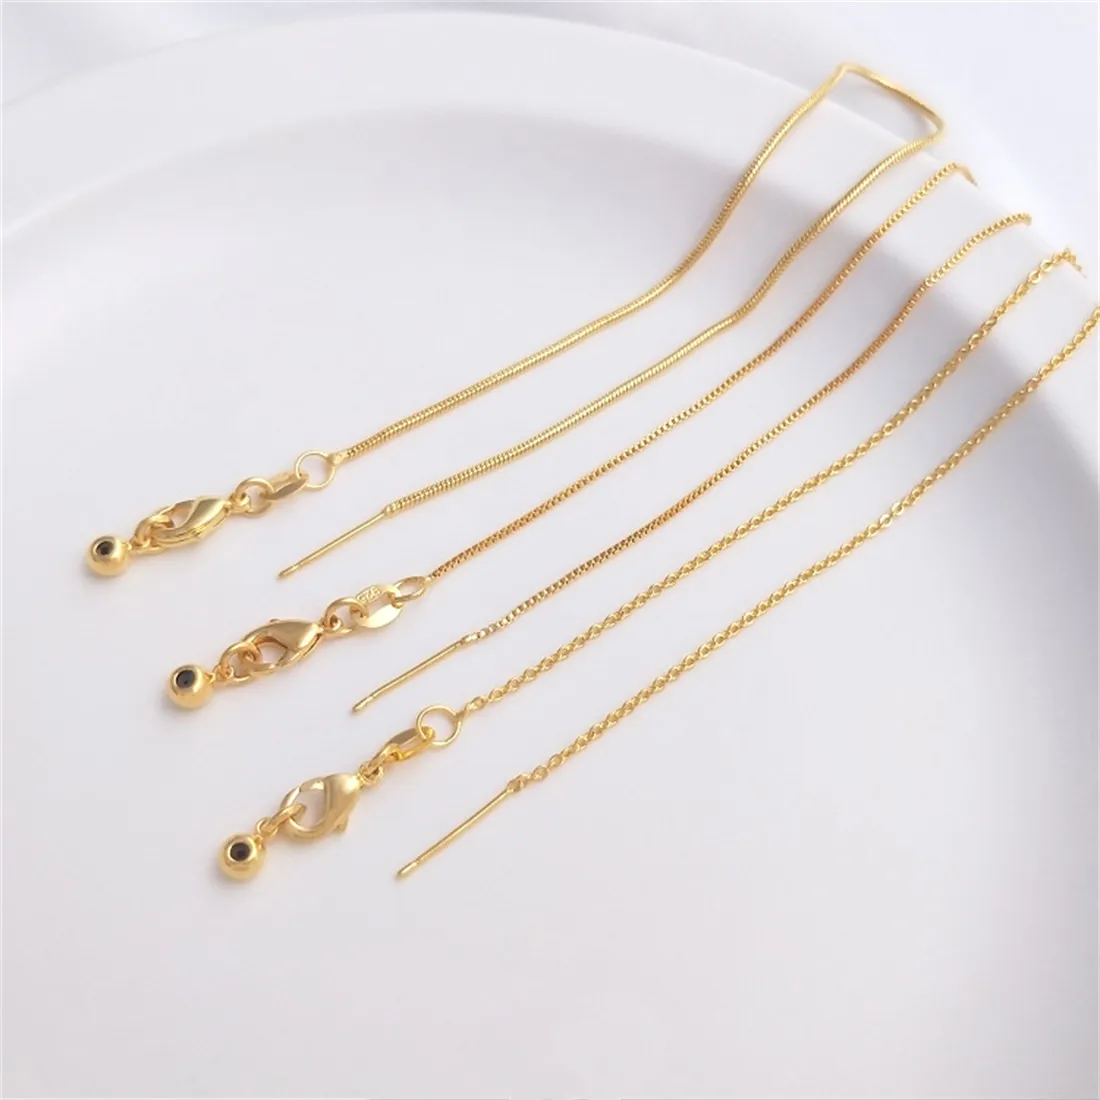 Vacuum Electroplated 24K Genuine Gold Universal Bracelet Necklace DIY Pin Type Adjustable Jewelry Accessories B757